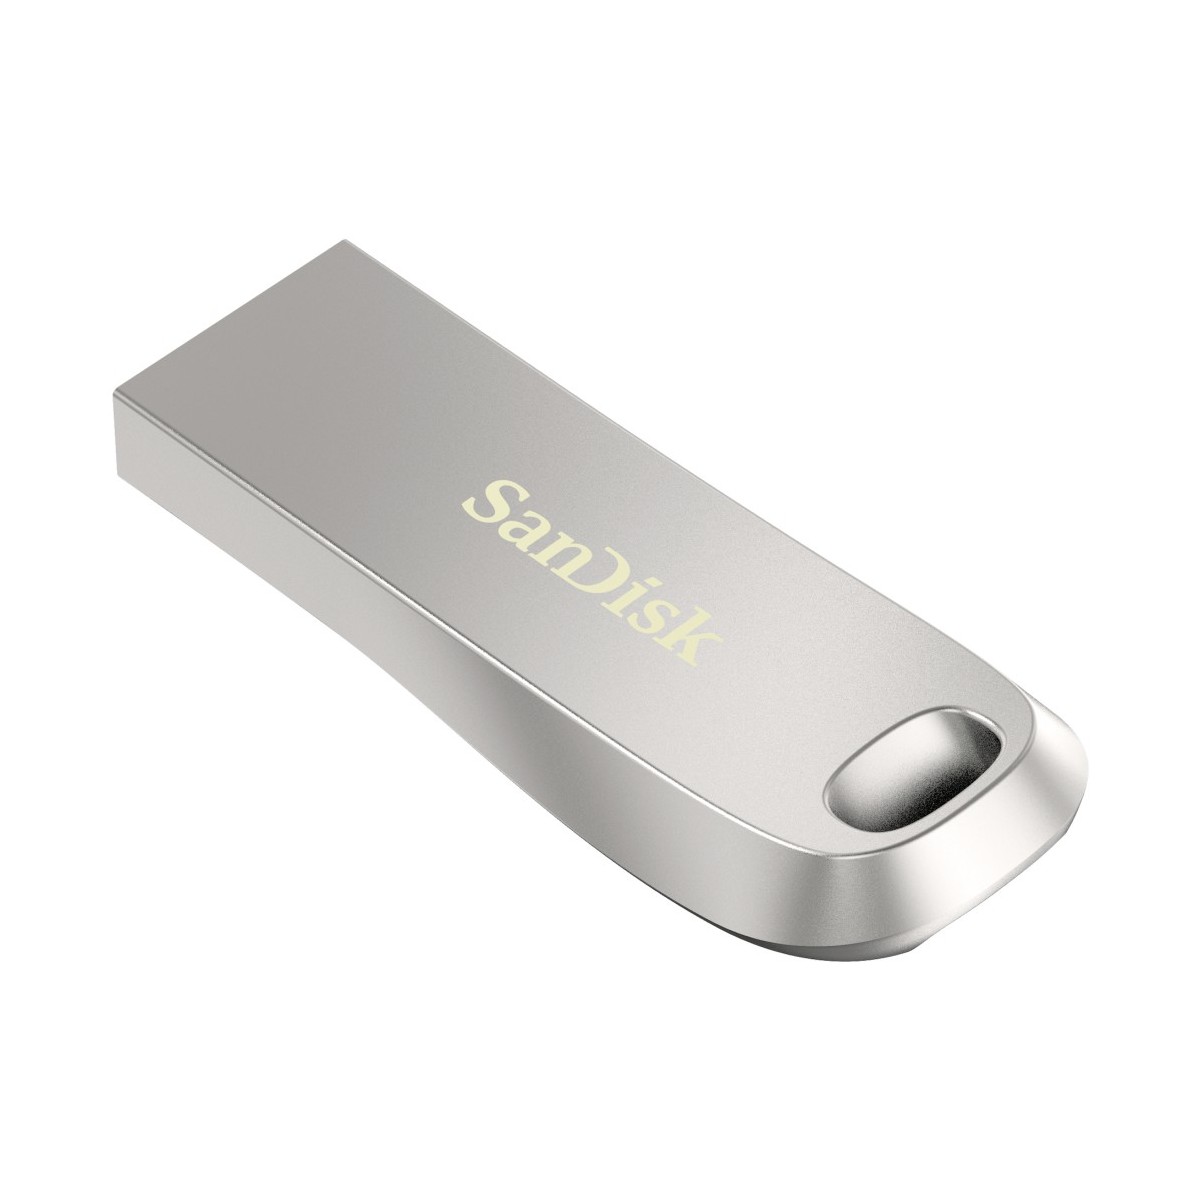 SANDISK ULTRA LUXE USB 3.1 128 GB, SDCZ74-128G-G46